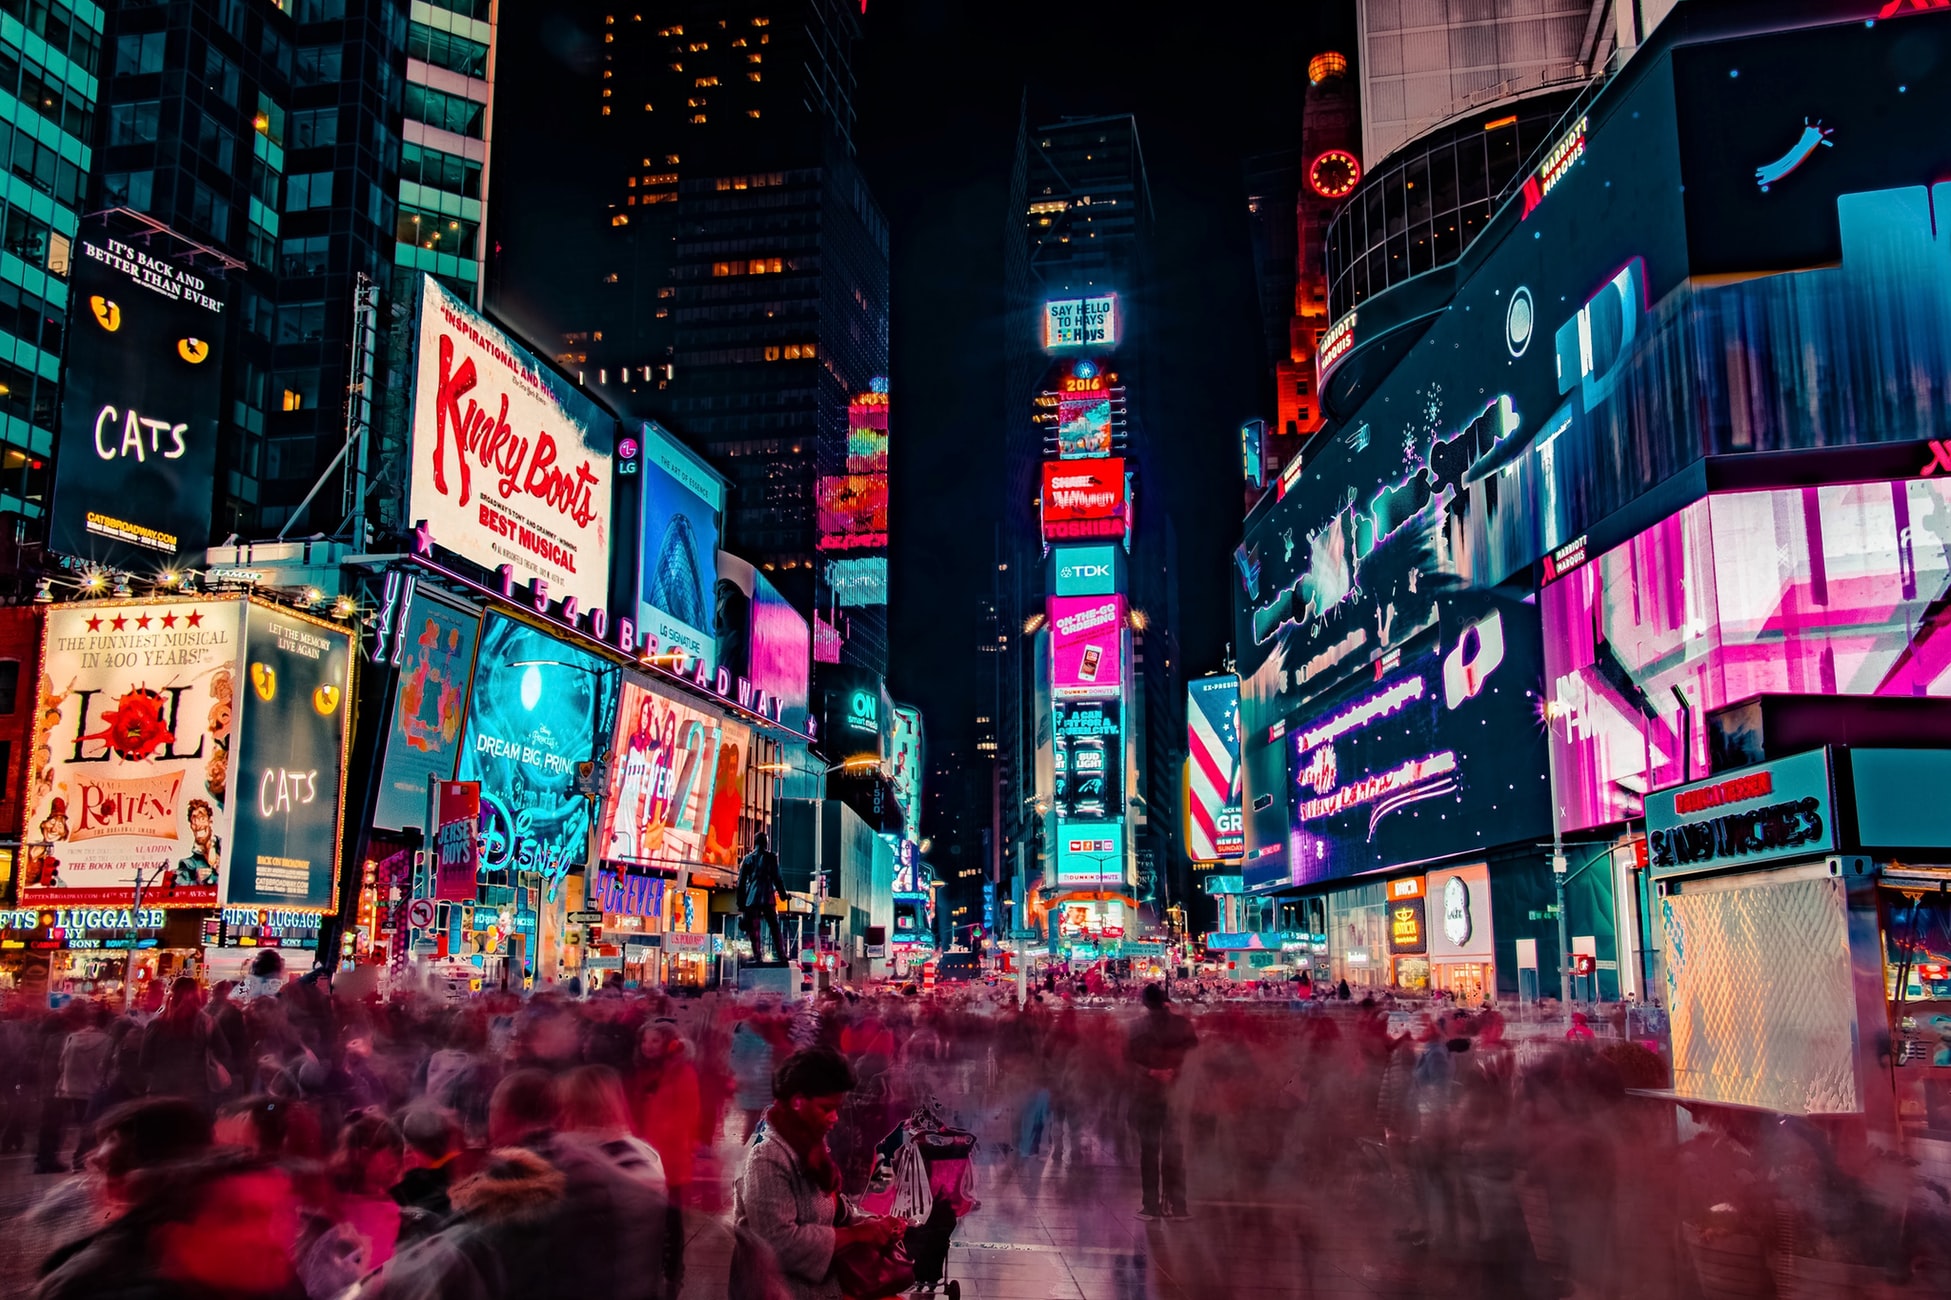 Night time image of NYC Times Square